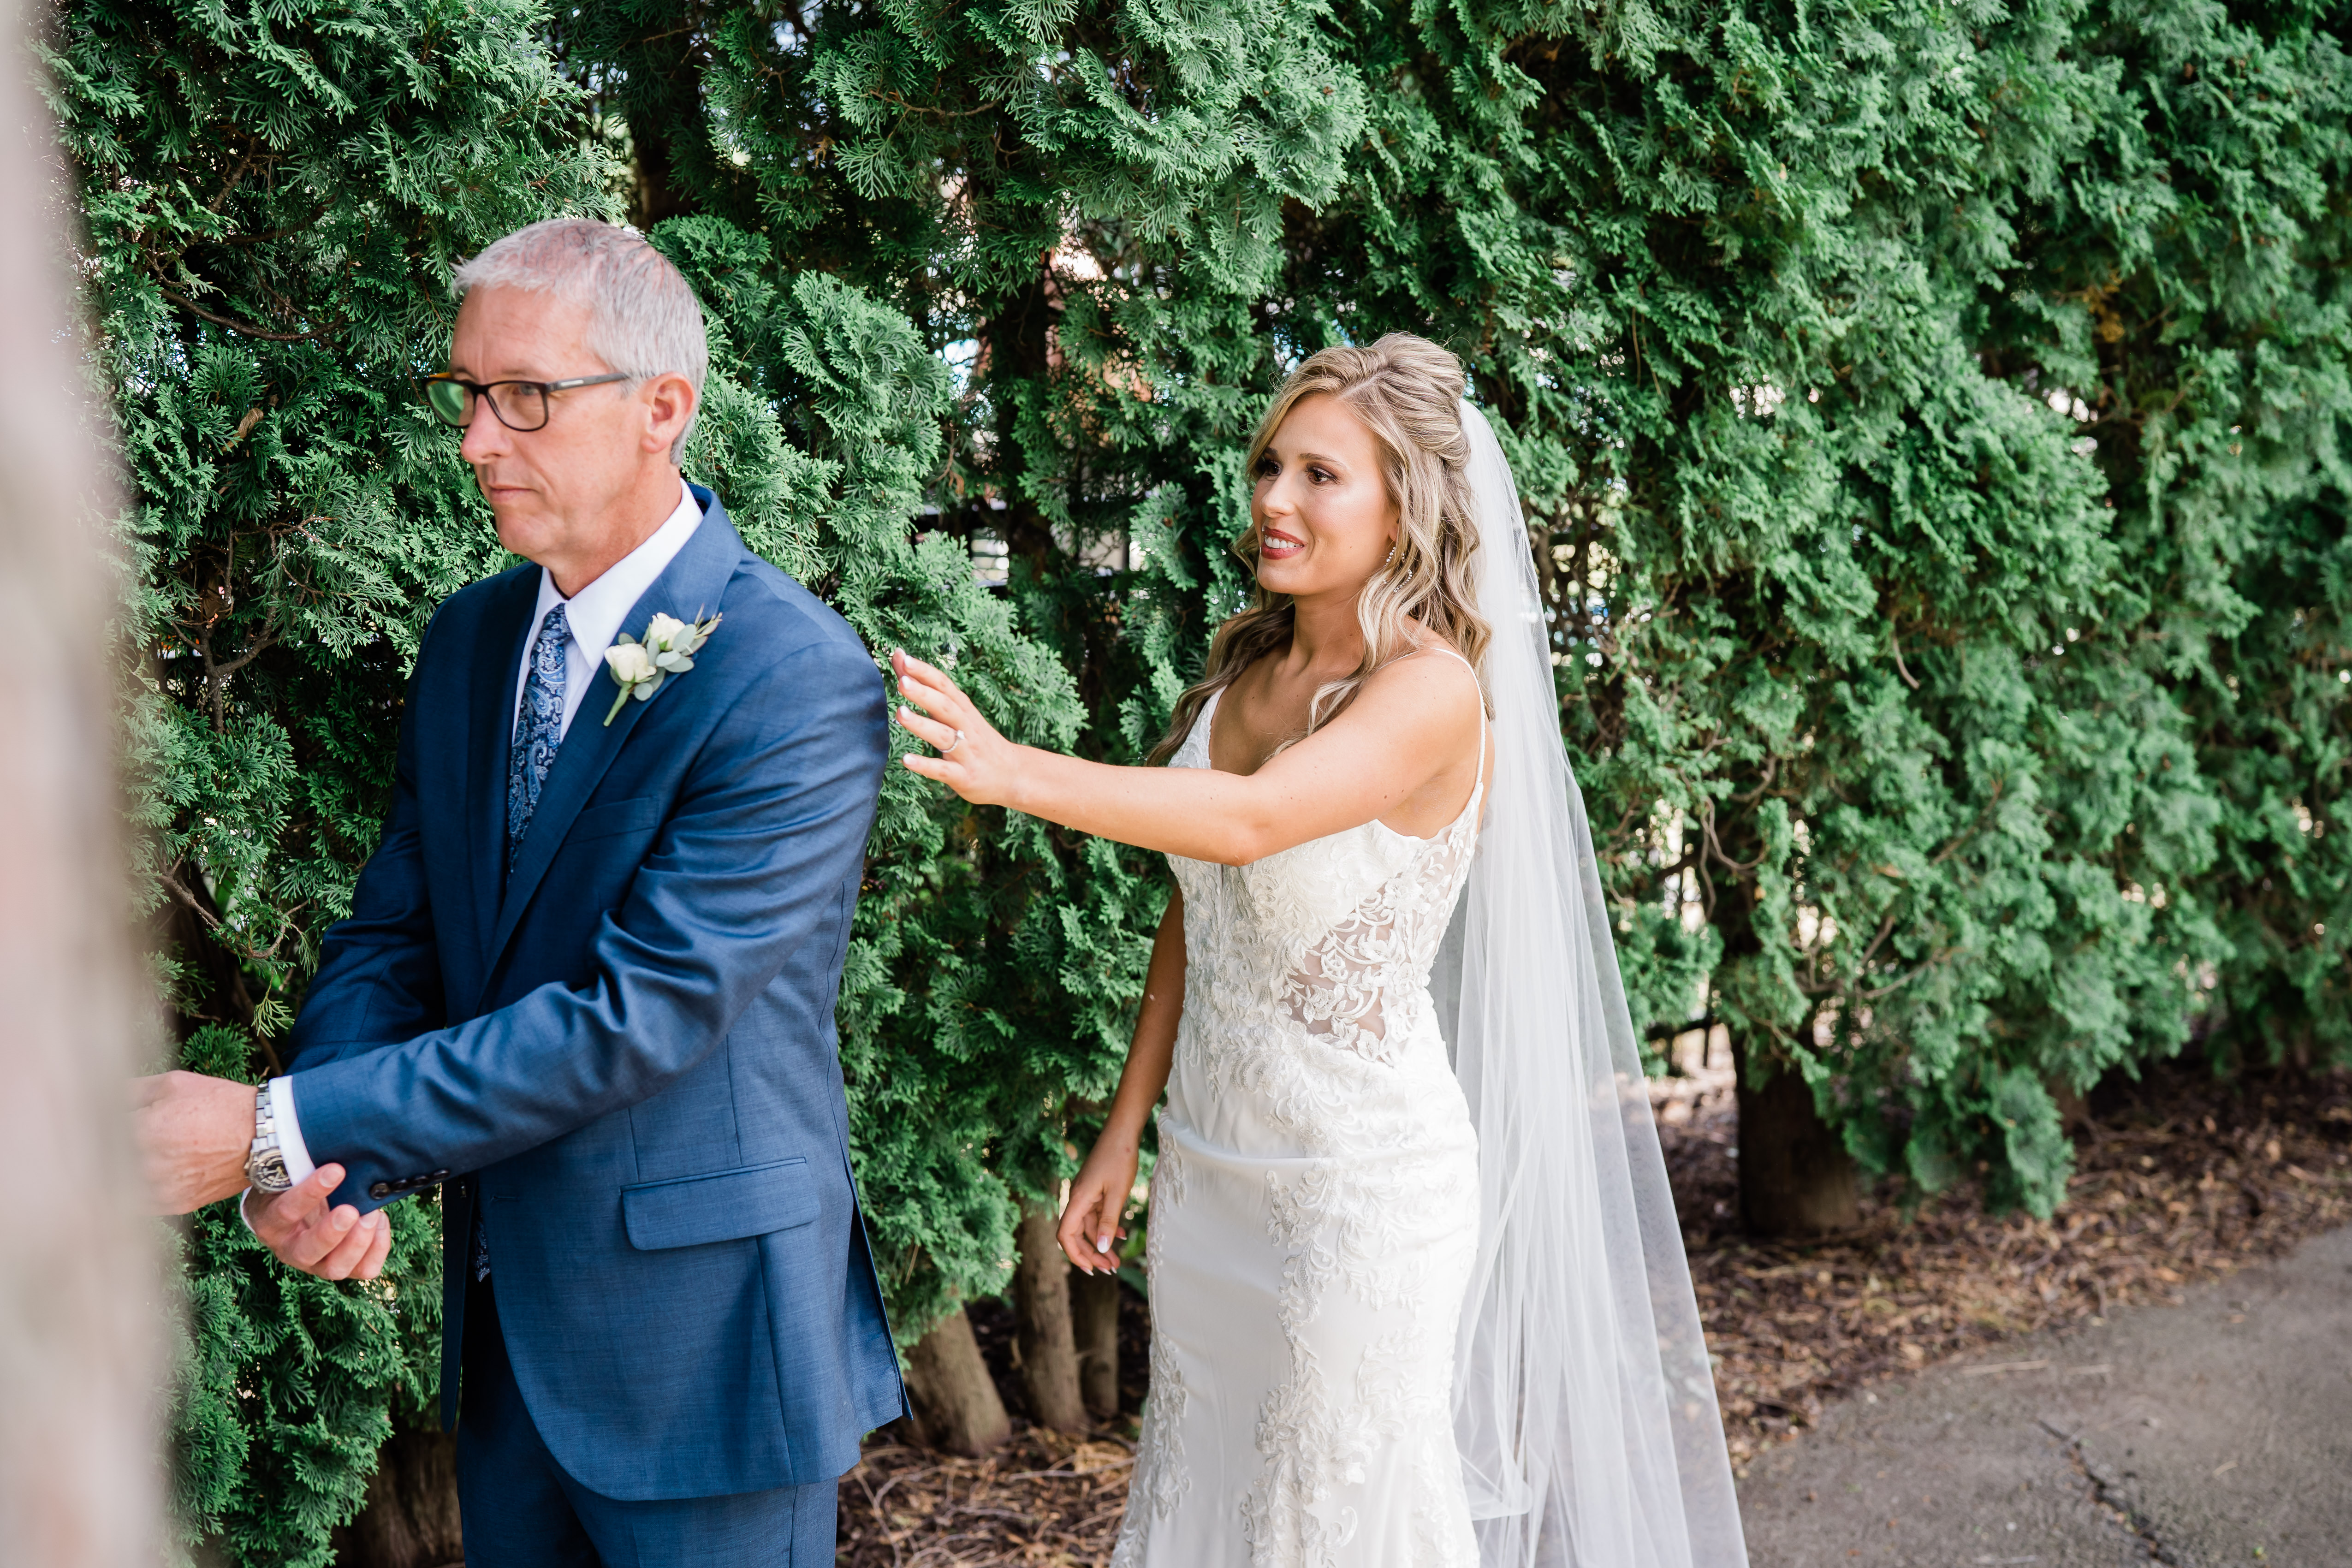 Fort Wayne wedding photographer captures bride tapping father's shoulder before first look